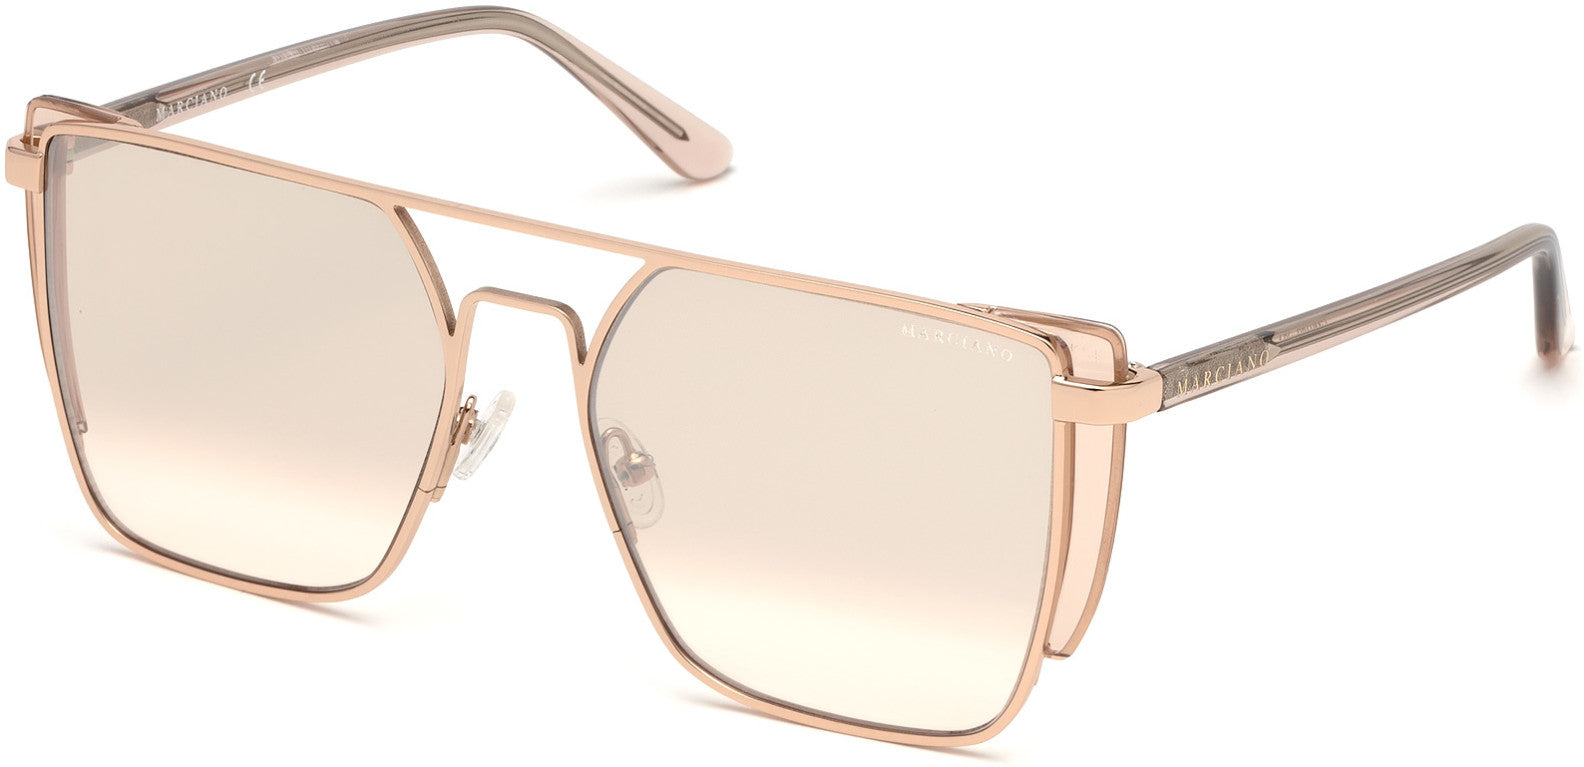 Guess By Marciano GM0789 Geometric Sunglasses 28Z-28Z - Shiny Rose Gold / Gradient Lenses